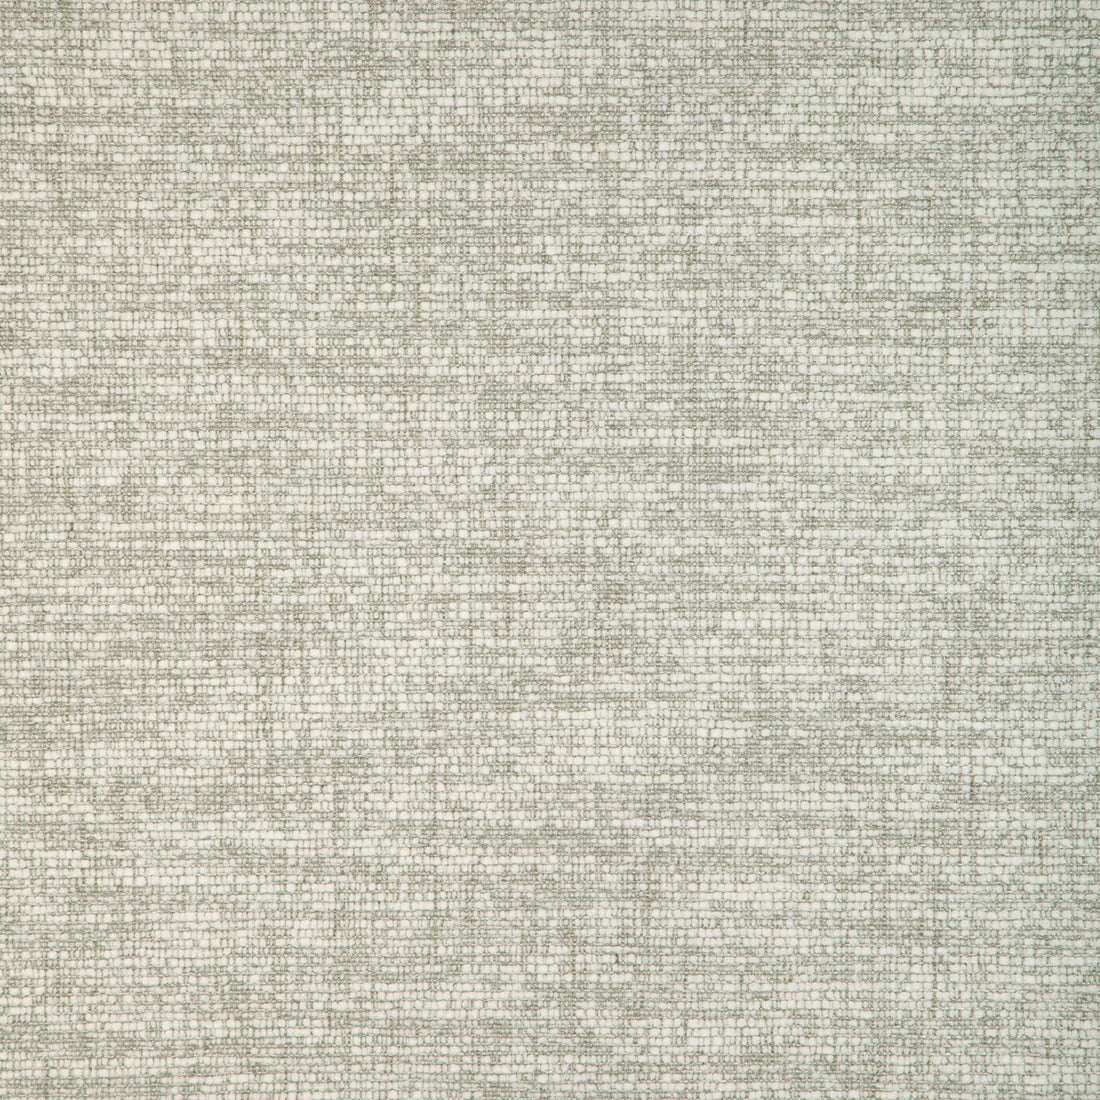 Chenille Aura fabric in stone color - pattern 36871.11.0 - by Kravet Couture in the Atelier Weaves collection